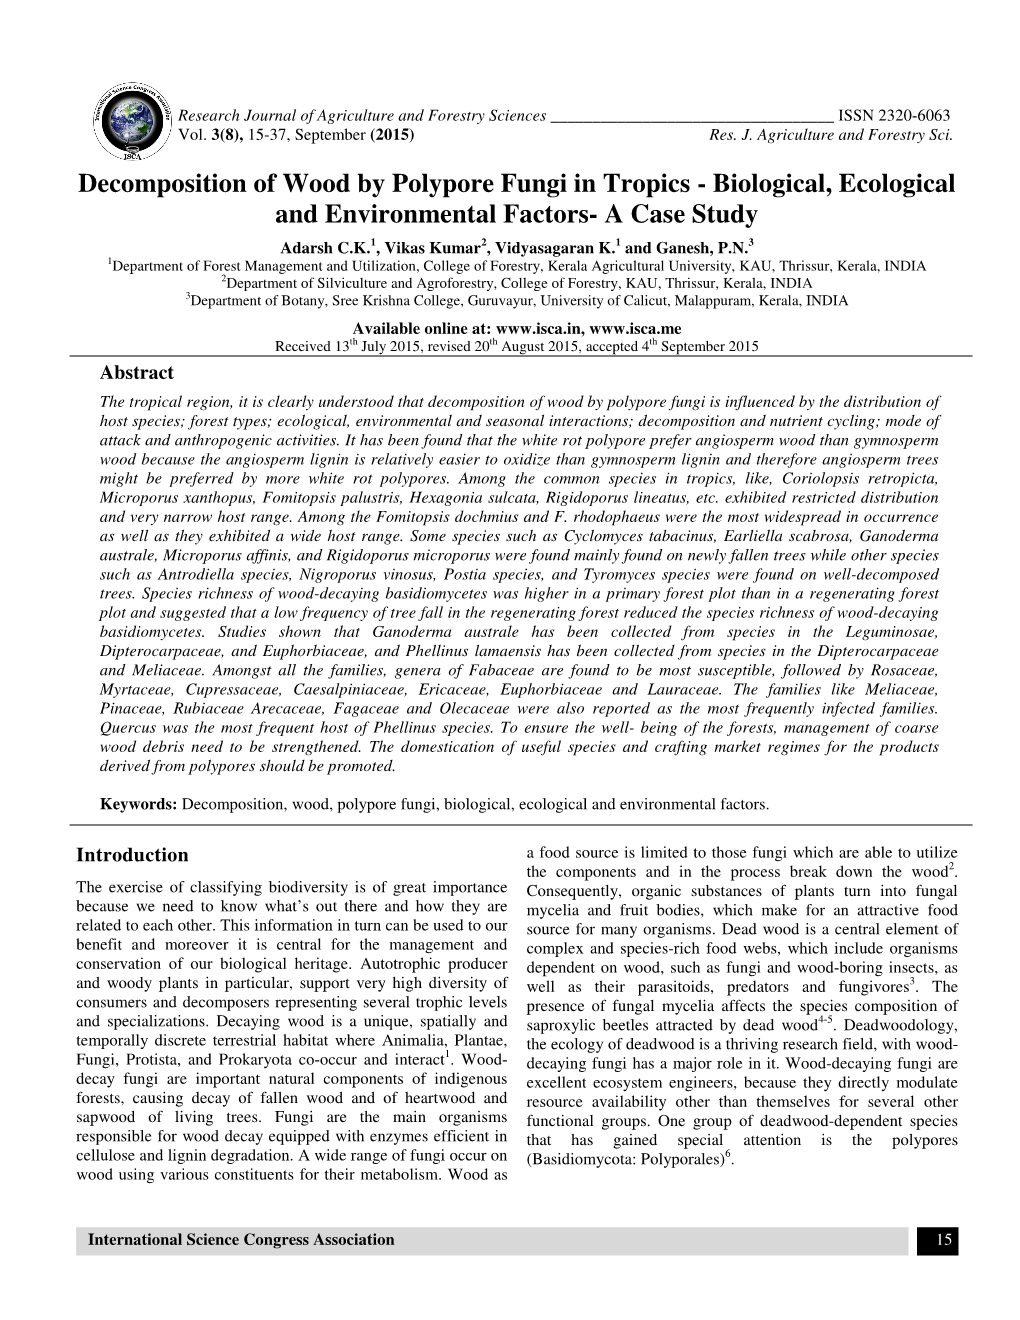 Decomposition of Wood by Polypore Fungi in Tropics - Biological, Ecological and Environmental Factors- a Case Study